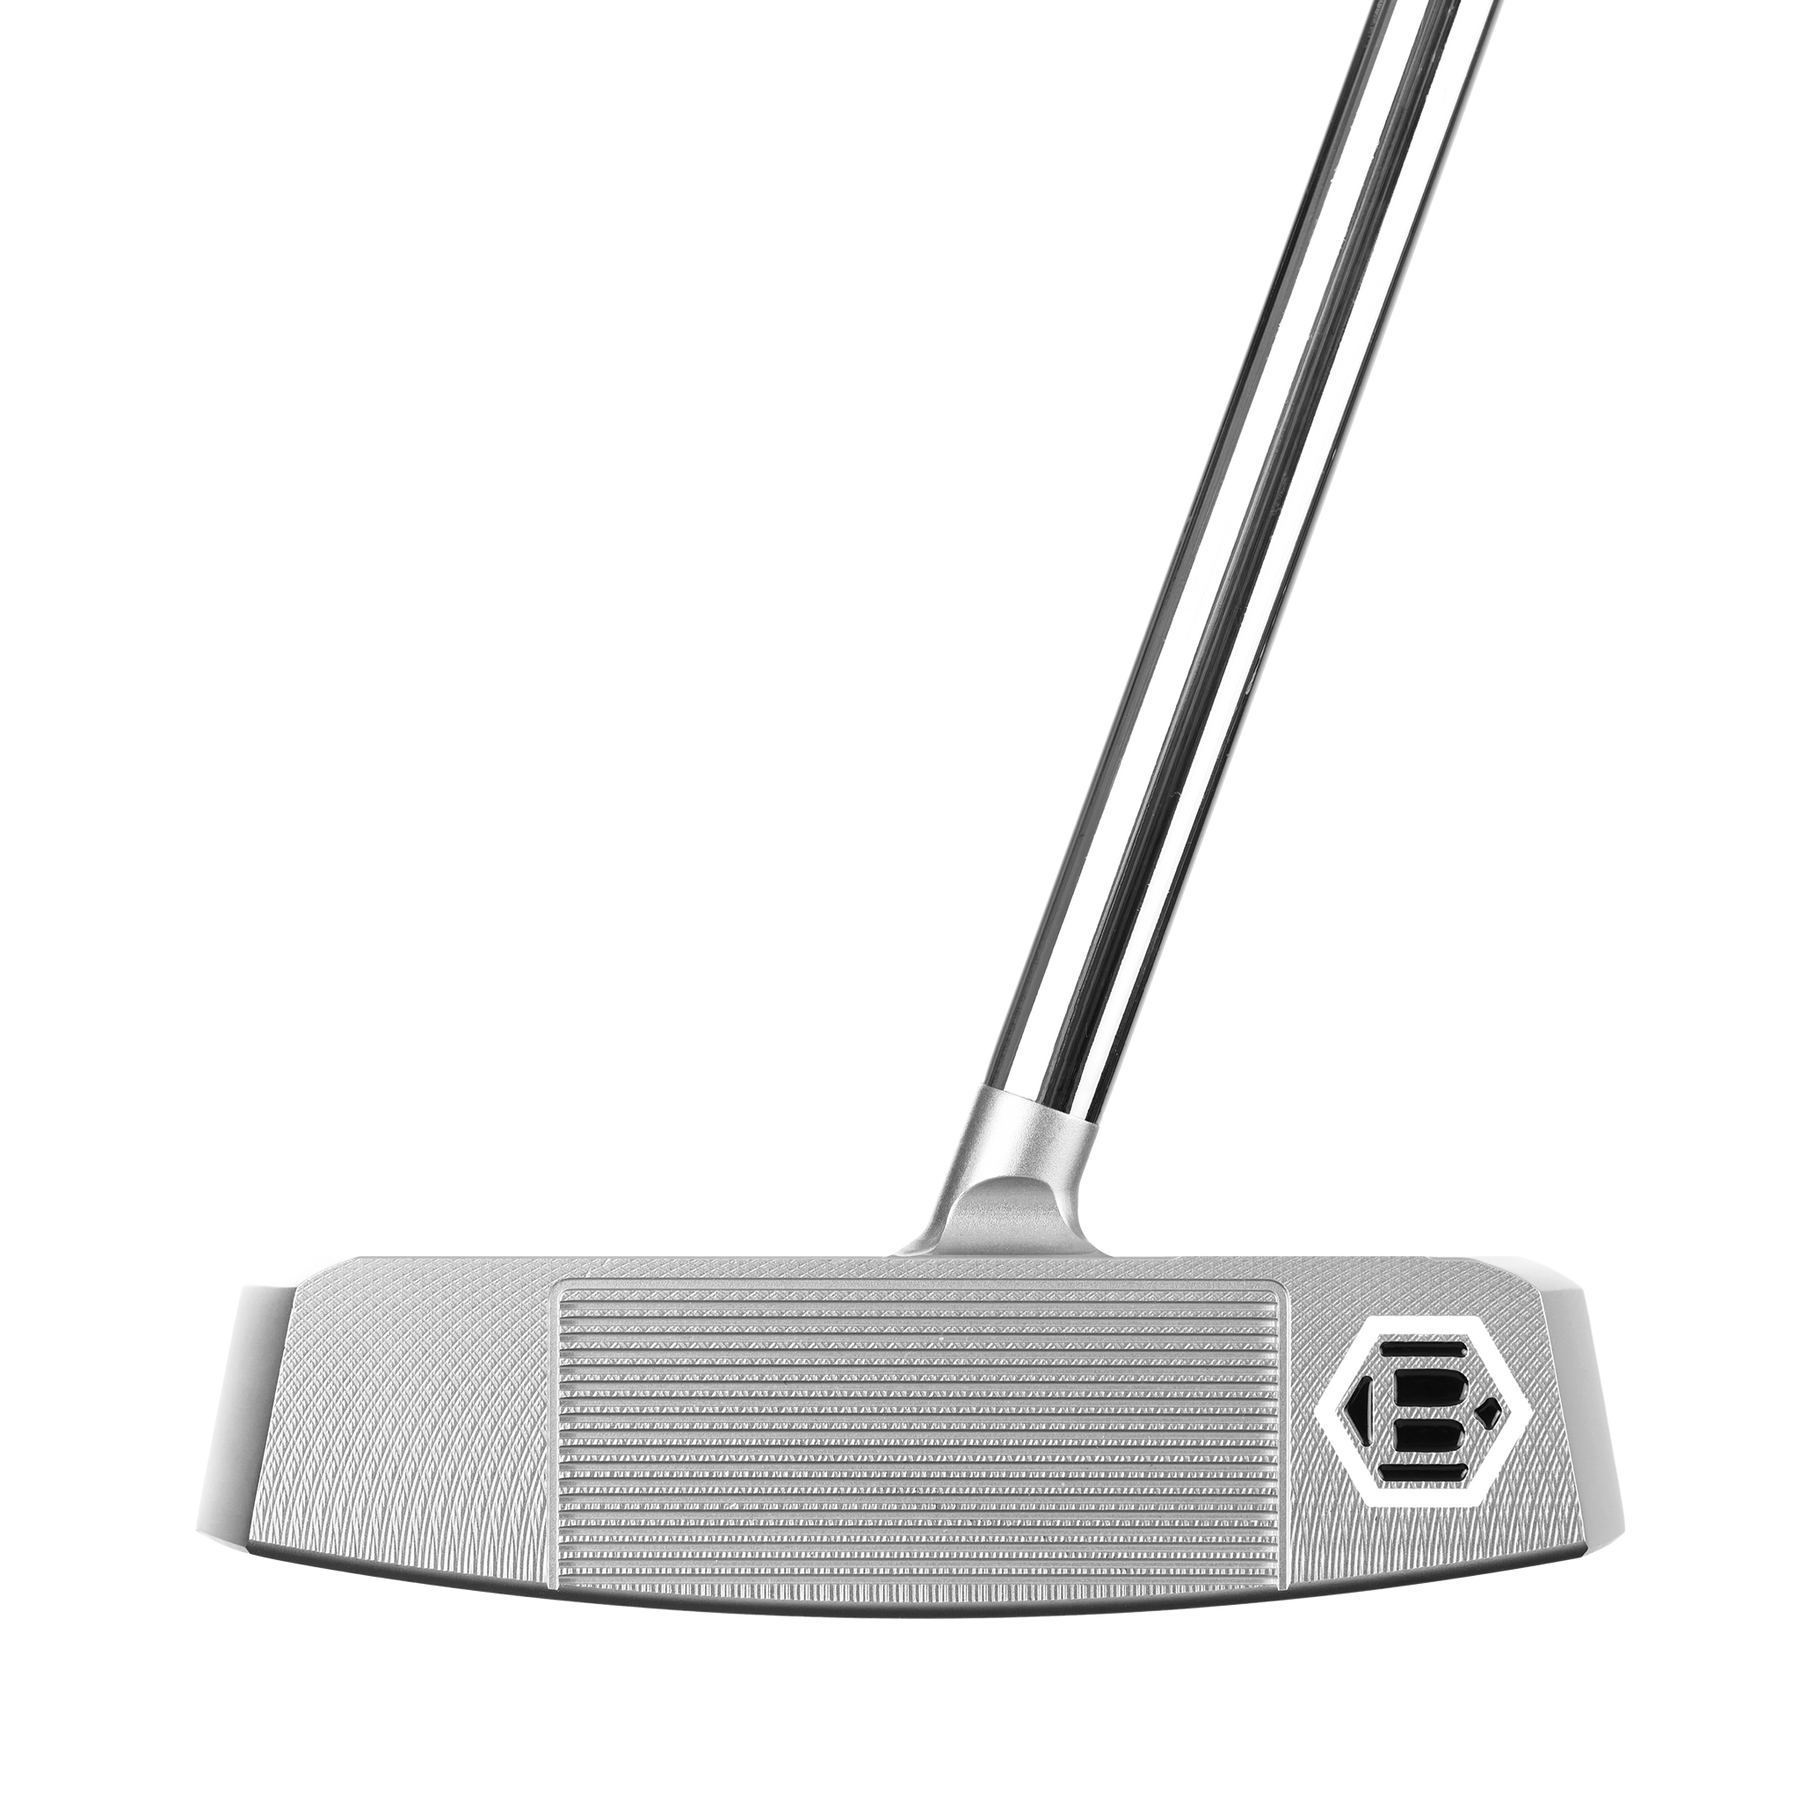 2022 INOVAI 6.0 Center Shaft Putter |Discover Yours Today! – Studio B